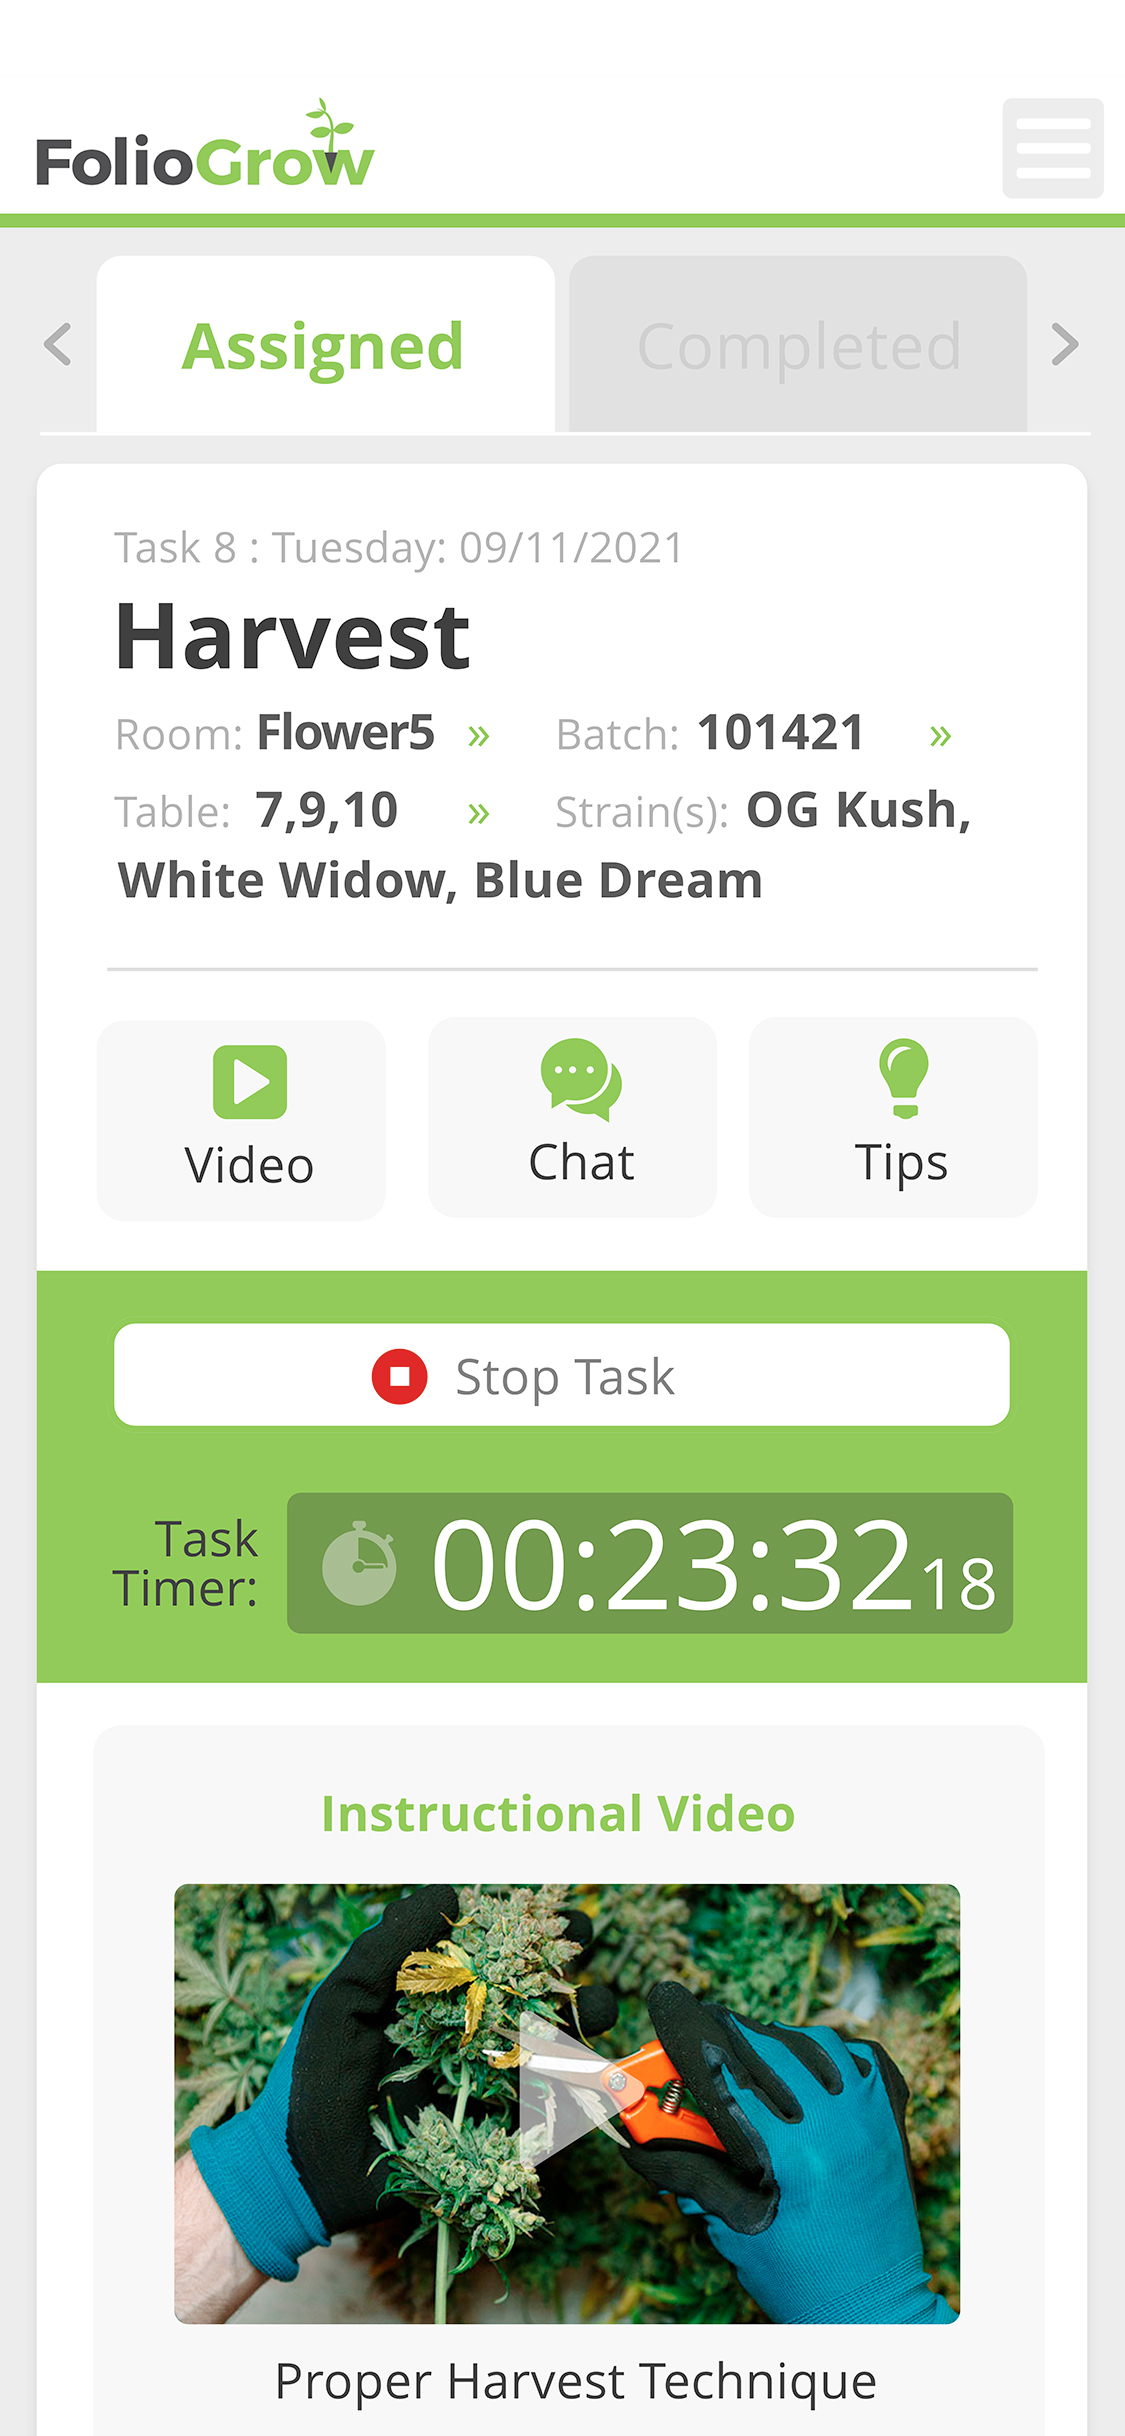 Team Member view of Grow Manager-assigned tasks